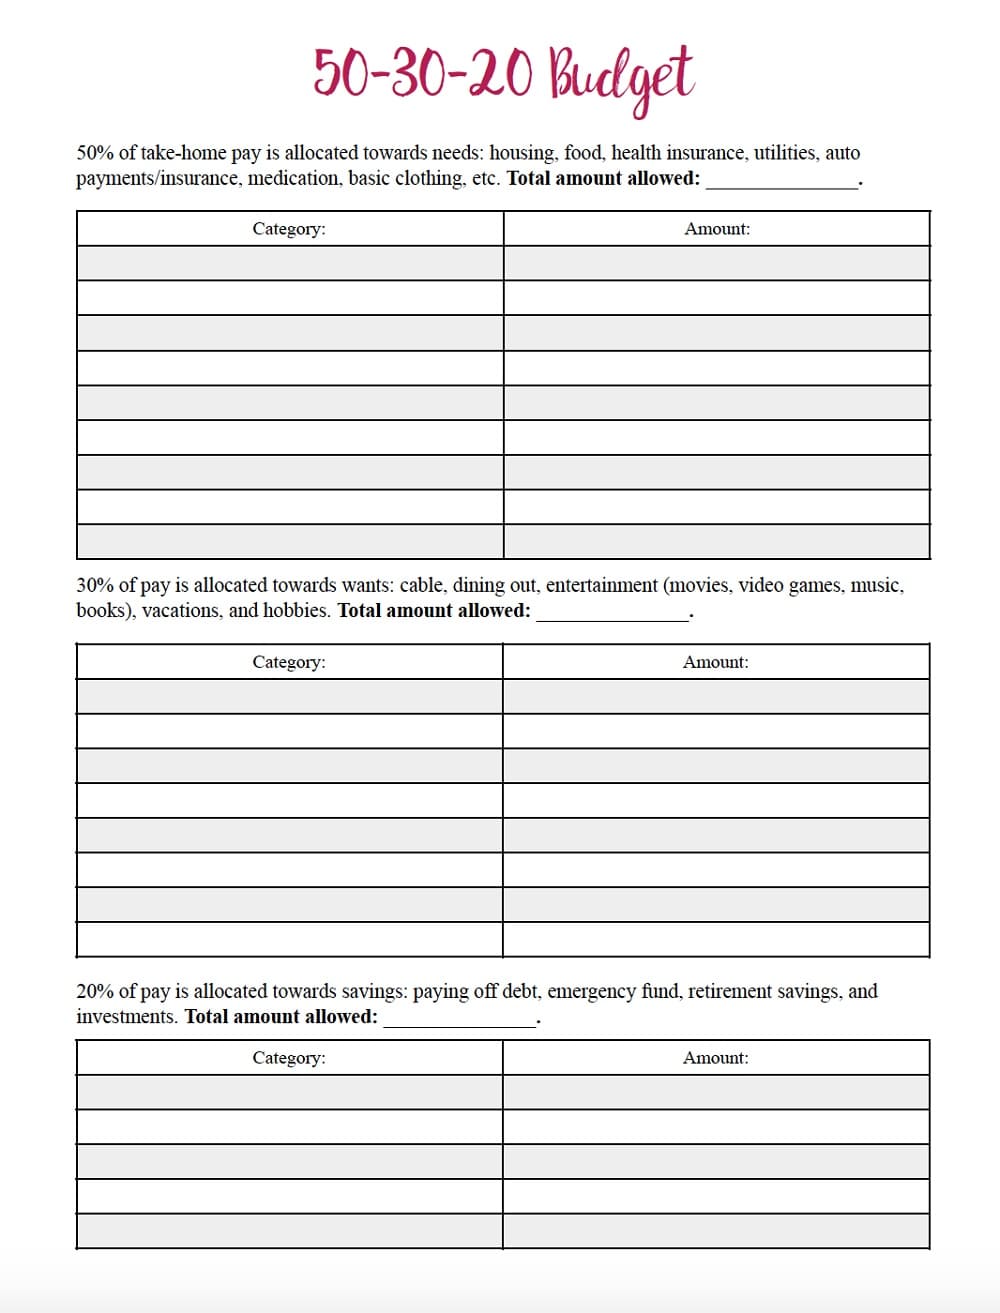 Printable 50-30-20 Budget Template Free Picture